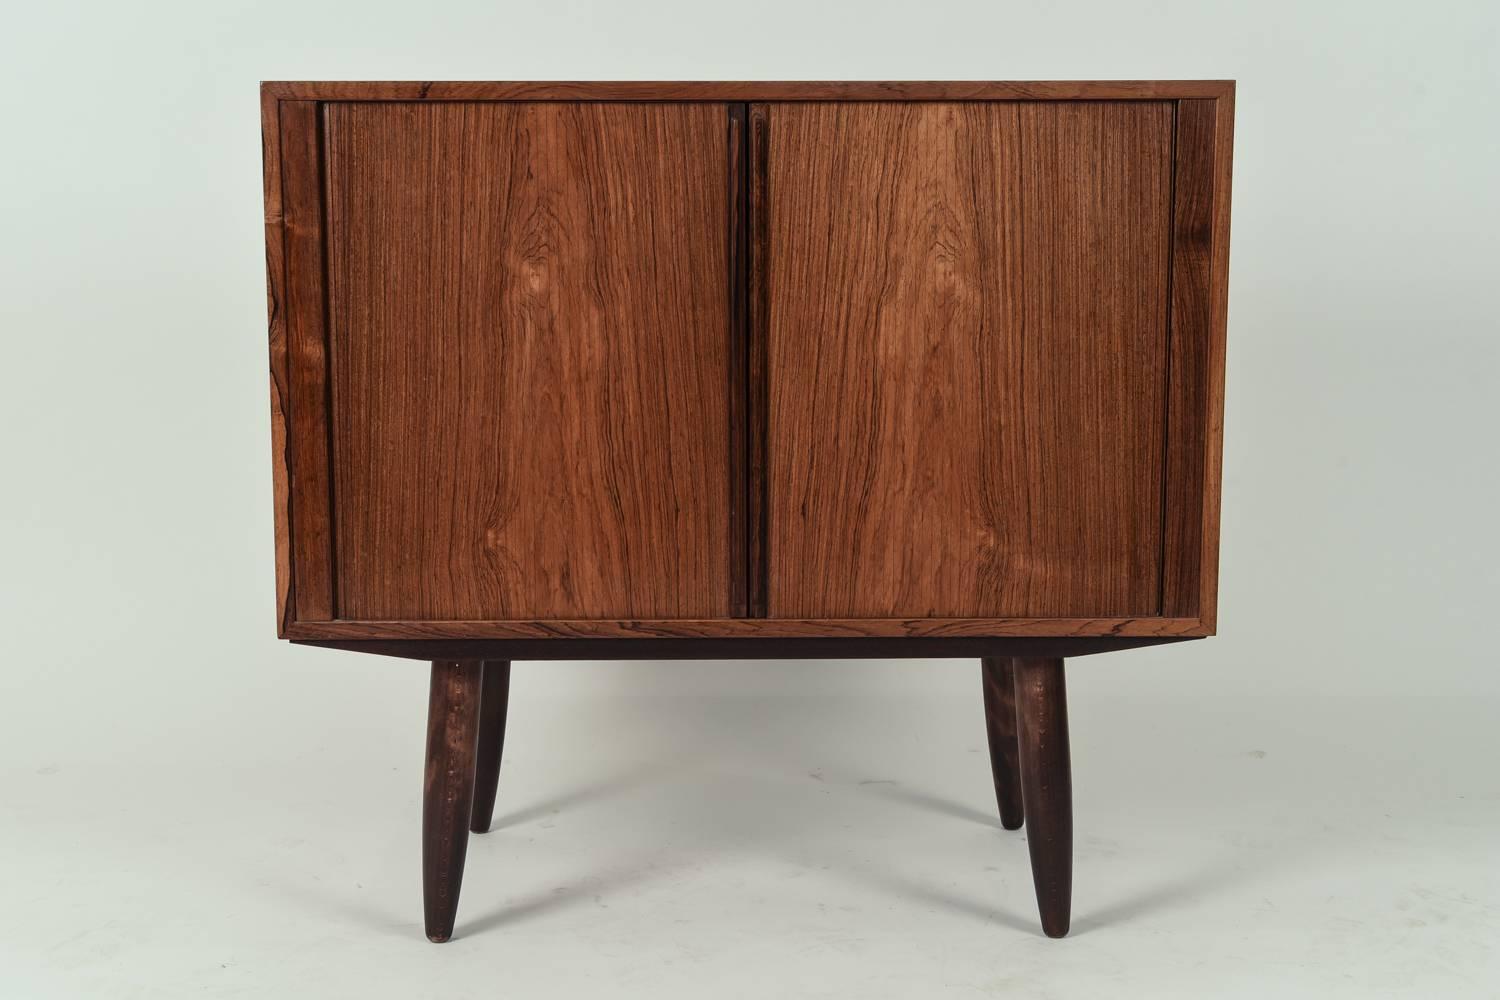 A great Mid-Century rosewood cabinet with tambour doors. Designed by Kai Kristiansen for Feldballes Møbelfabrik.